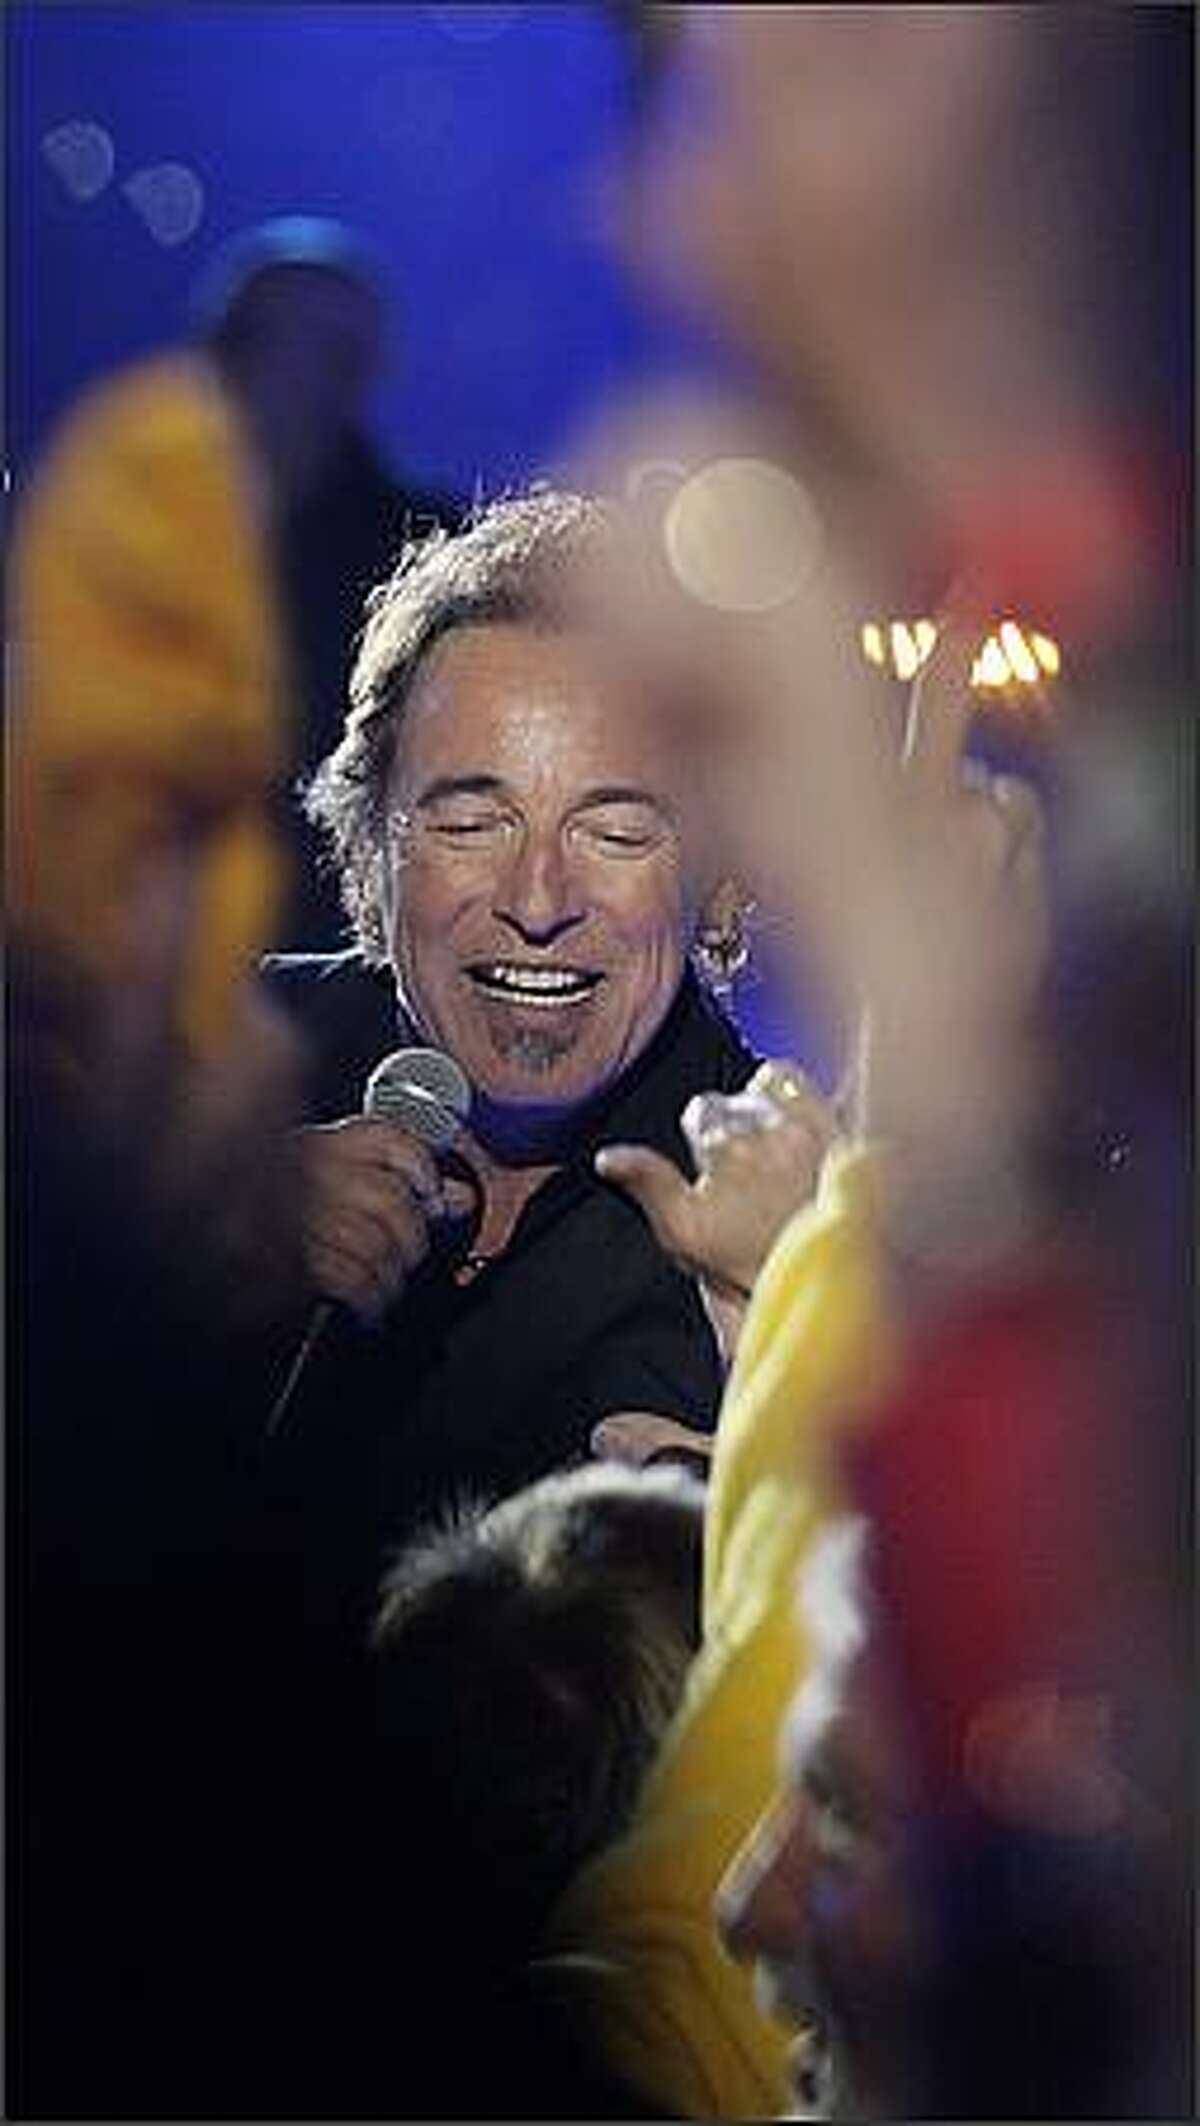 Bruce Springsteen performs during the halftime of the NFL Super Bowl XLIII. (AP Photo/David J. Phillip)